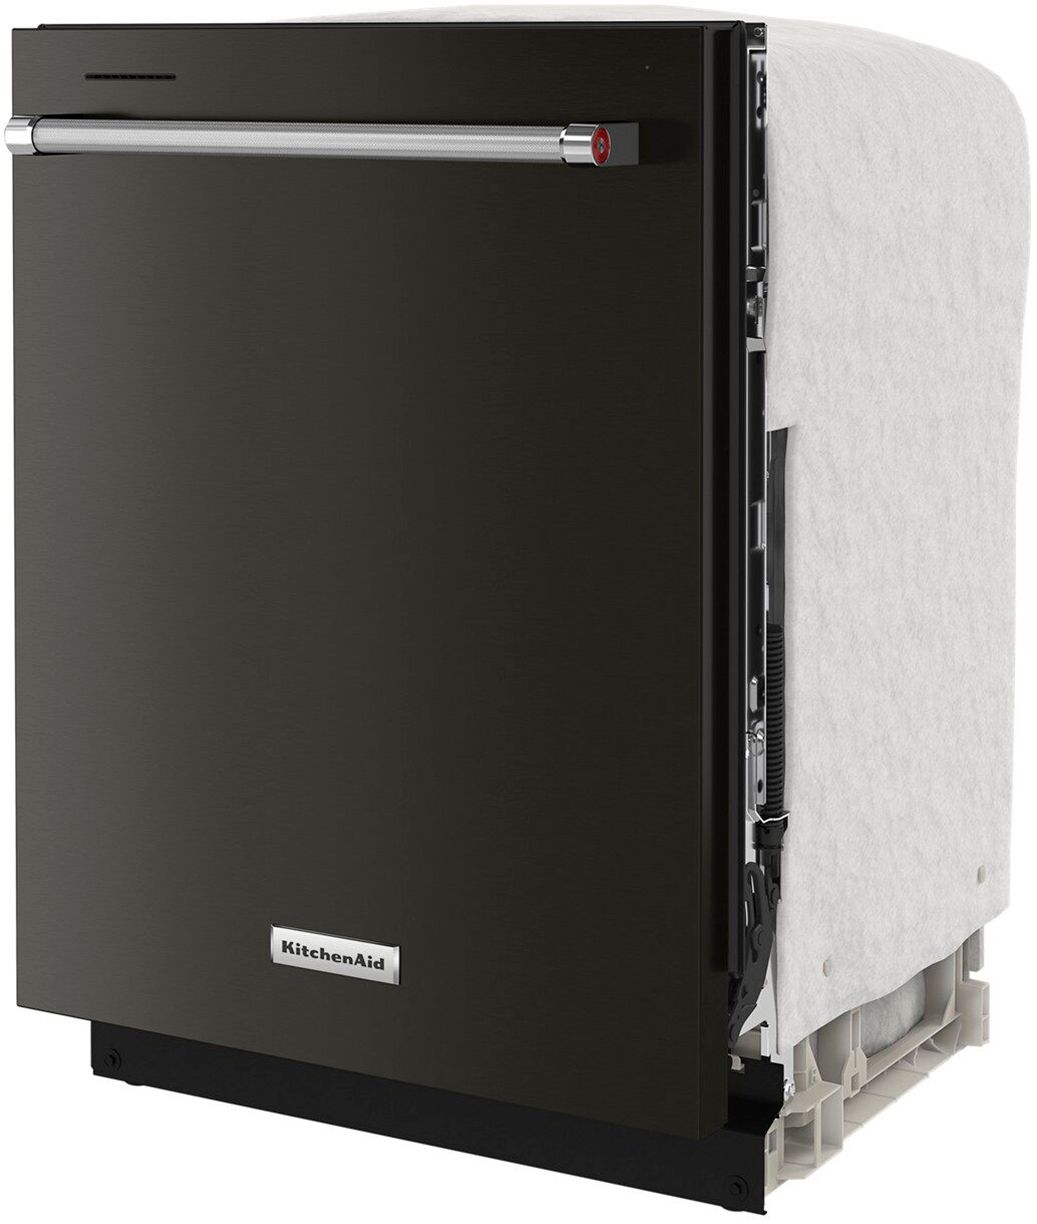 Angle View: KitchenAid - 24" Top Control Built-In Dishwasher with Stainless Steel Tub, PrintShield Finish, 3rd Rack, 39 dBA - Black Stainless Steel